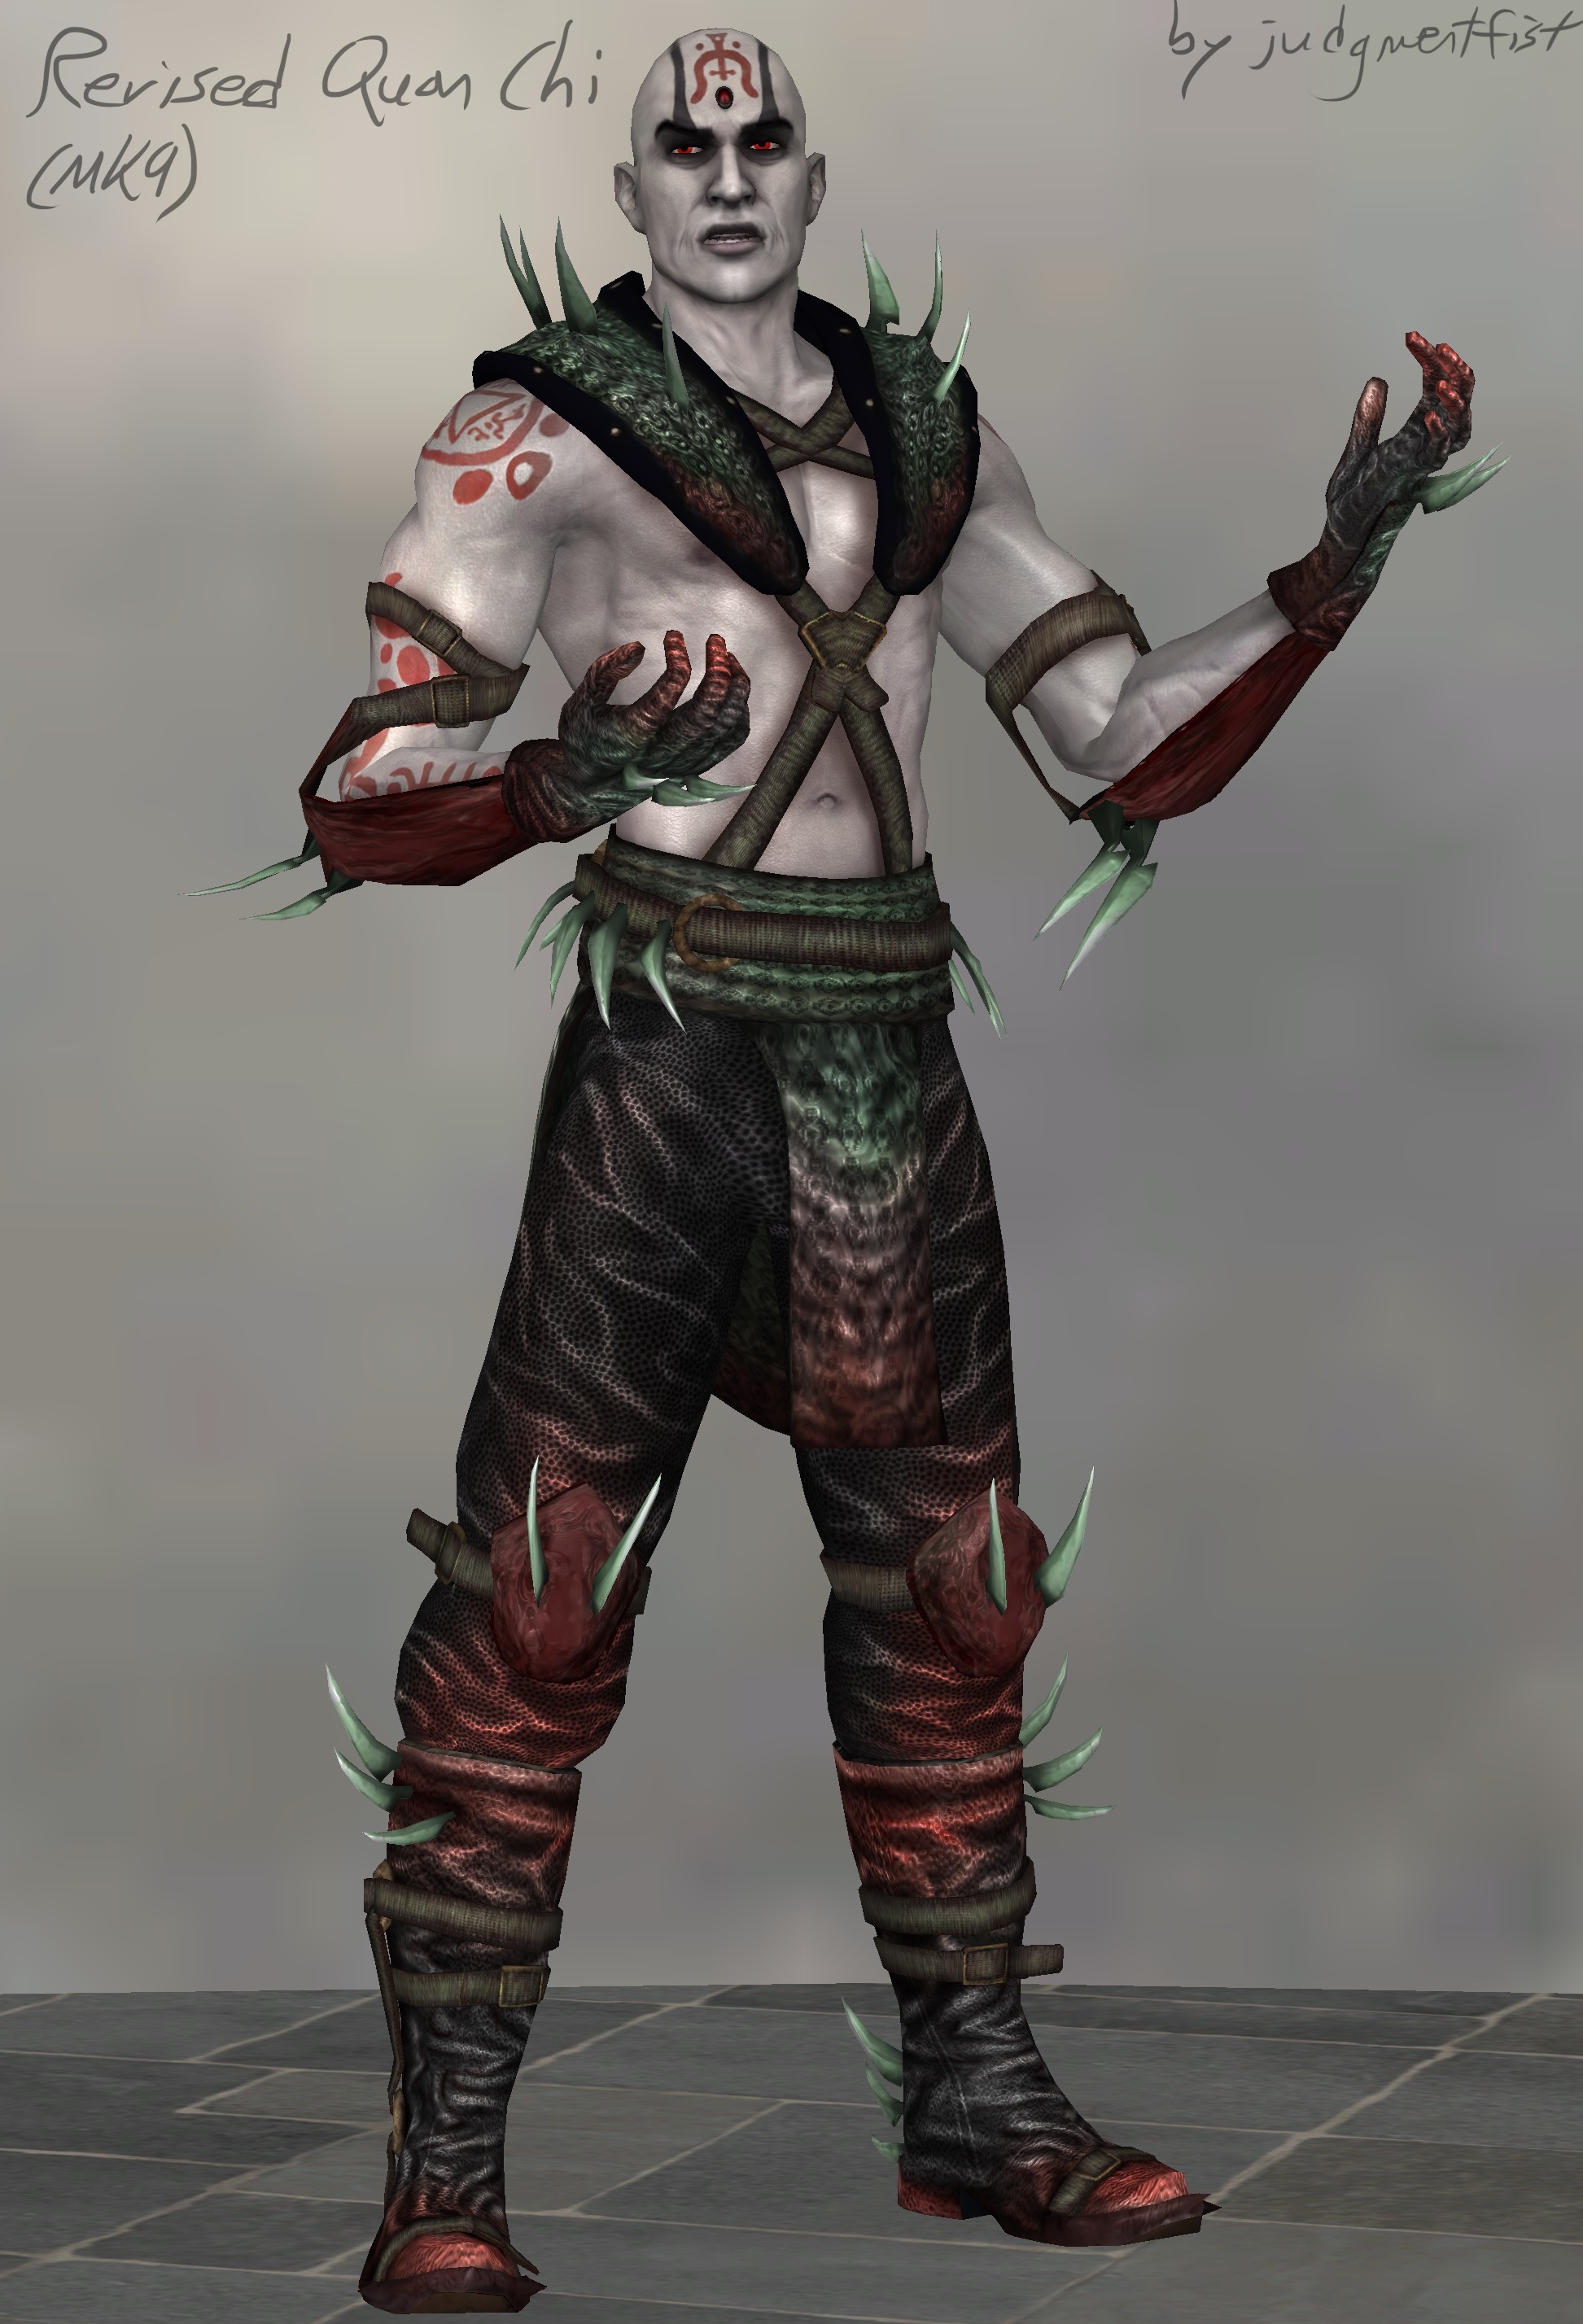 Revised Quan Chi MK9 [xps download] by judgmentfist on DeviantArt